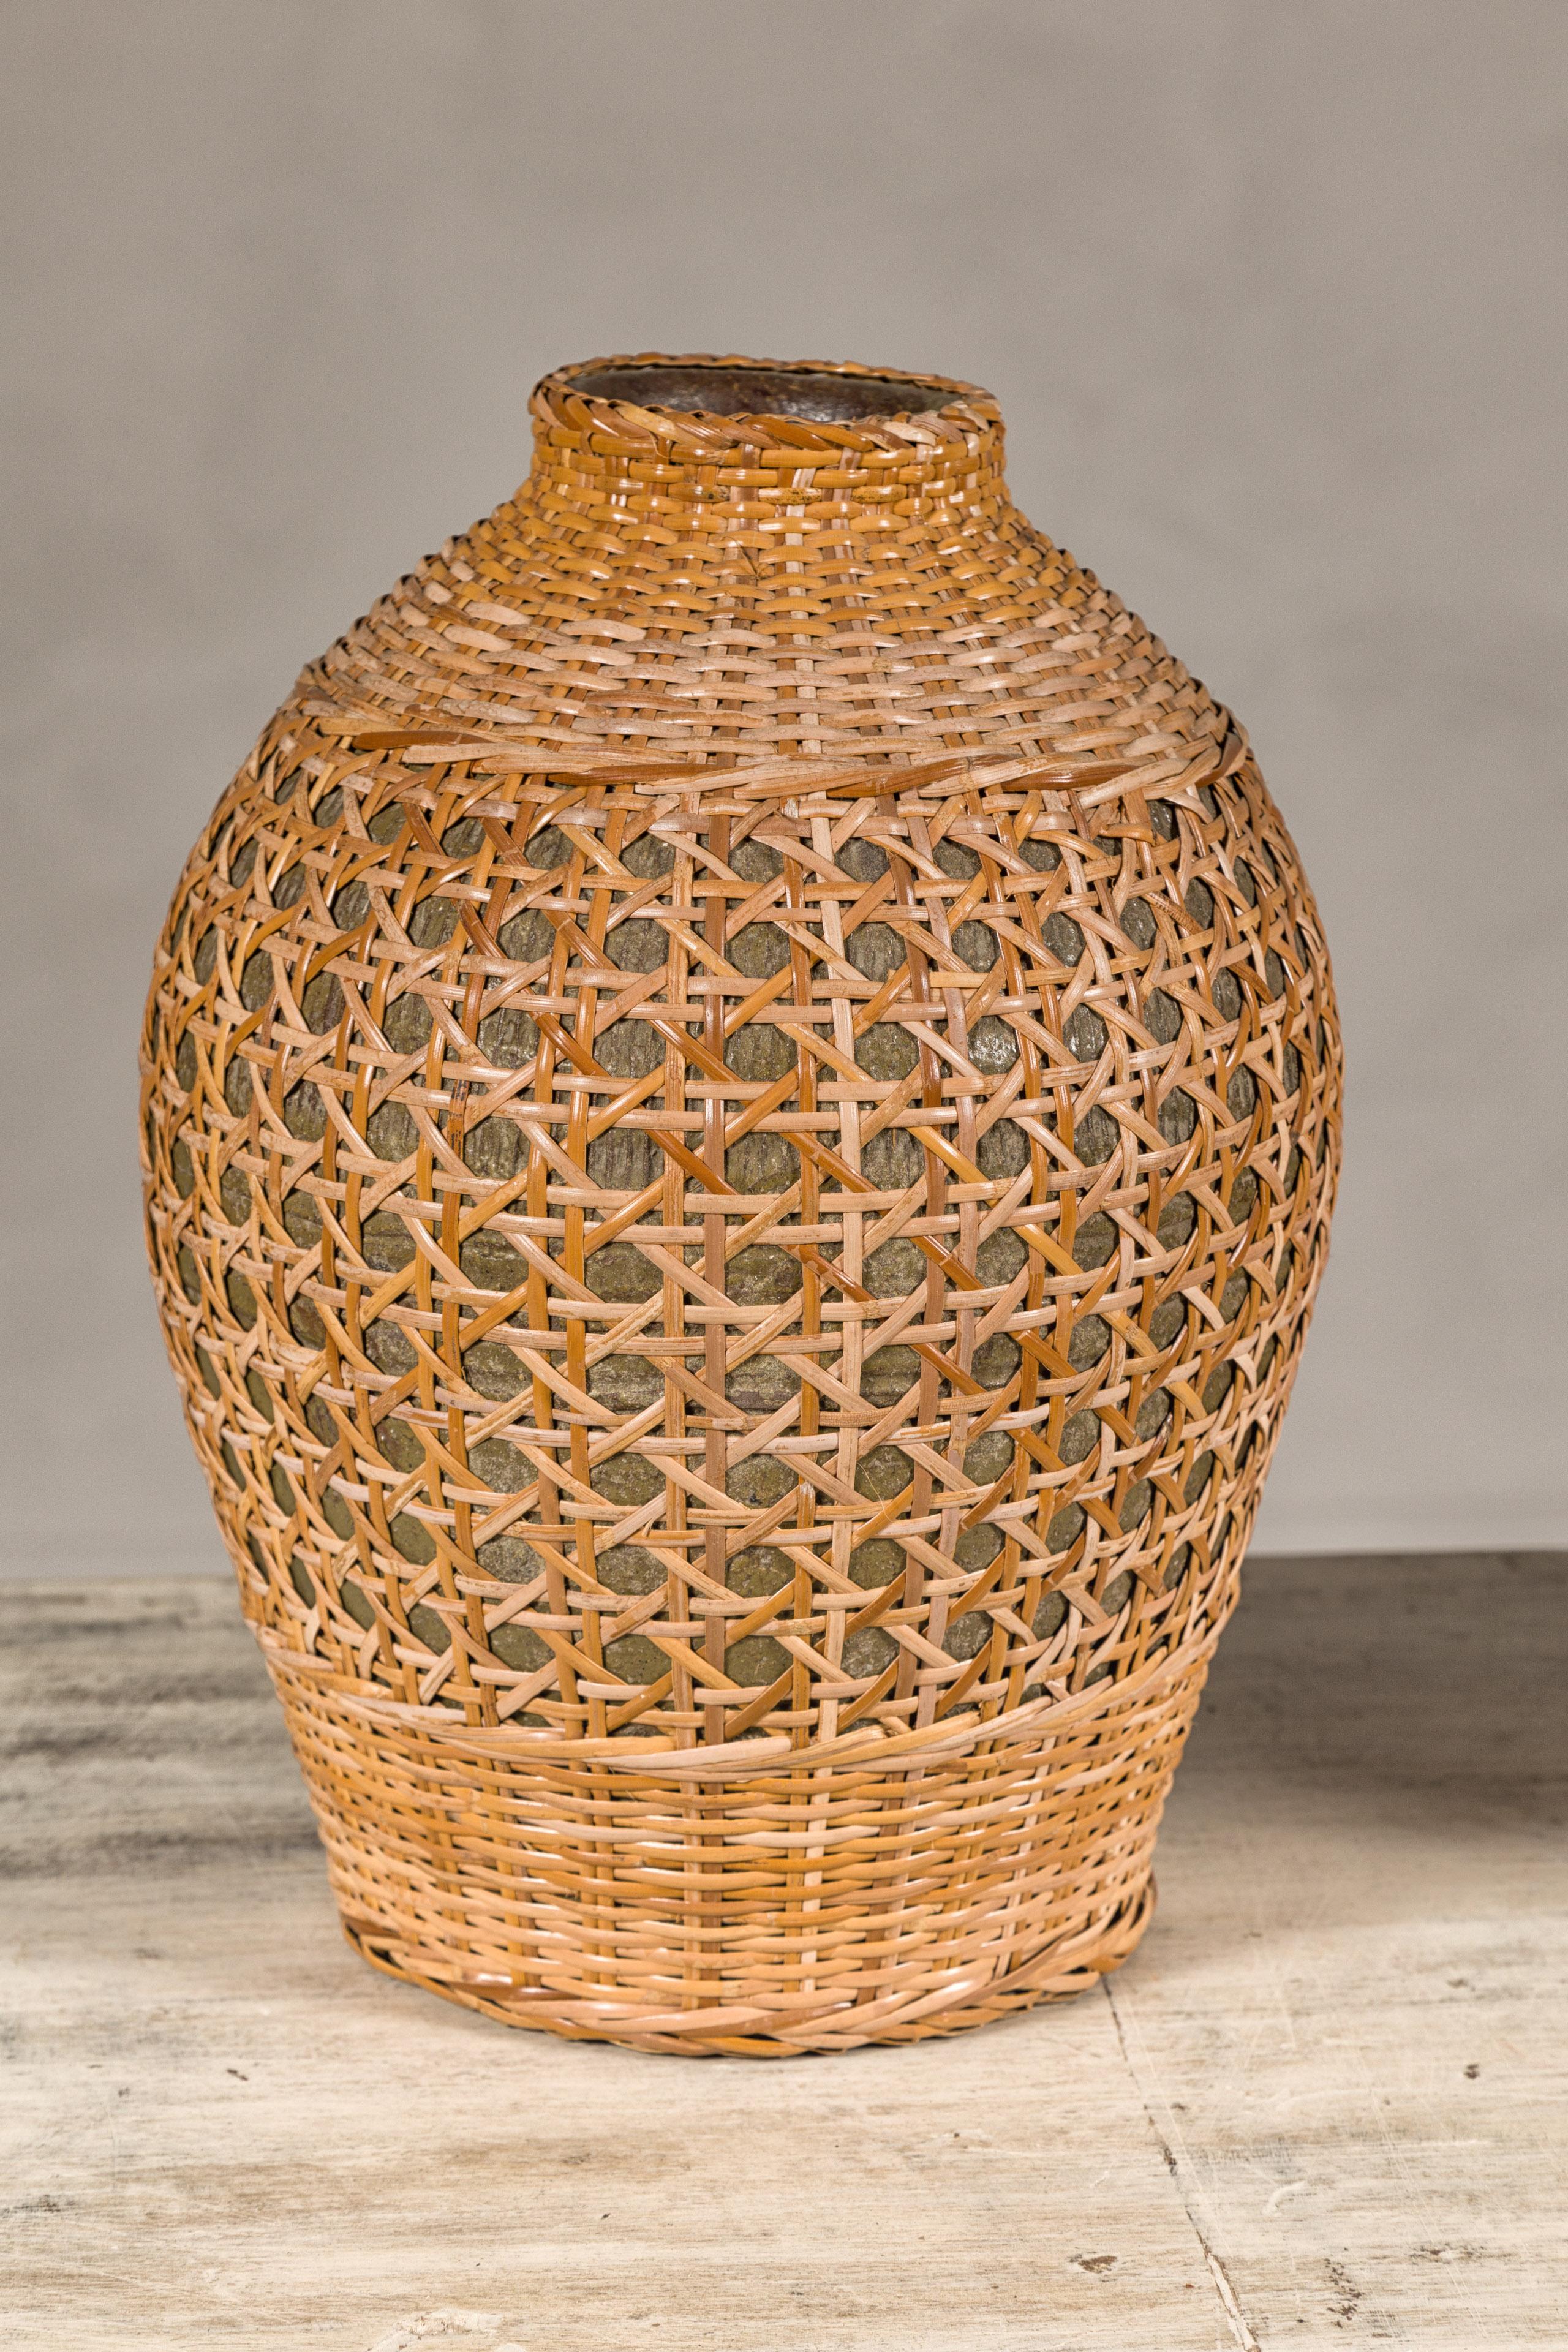 Chinese Rustic Pair of Midcentury Wicker Vases Made of Cane over Ceramic